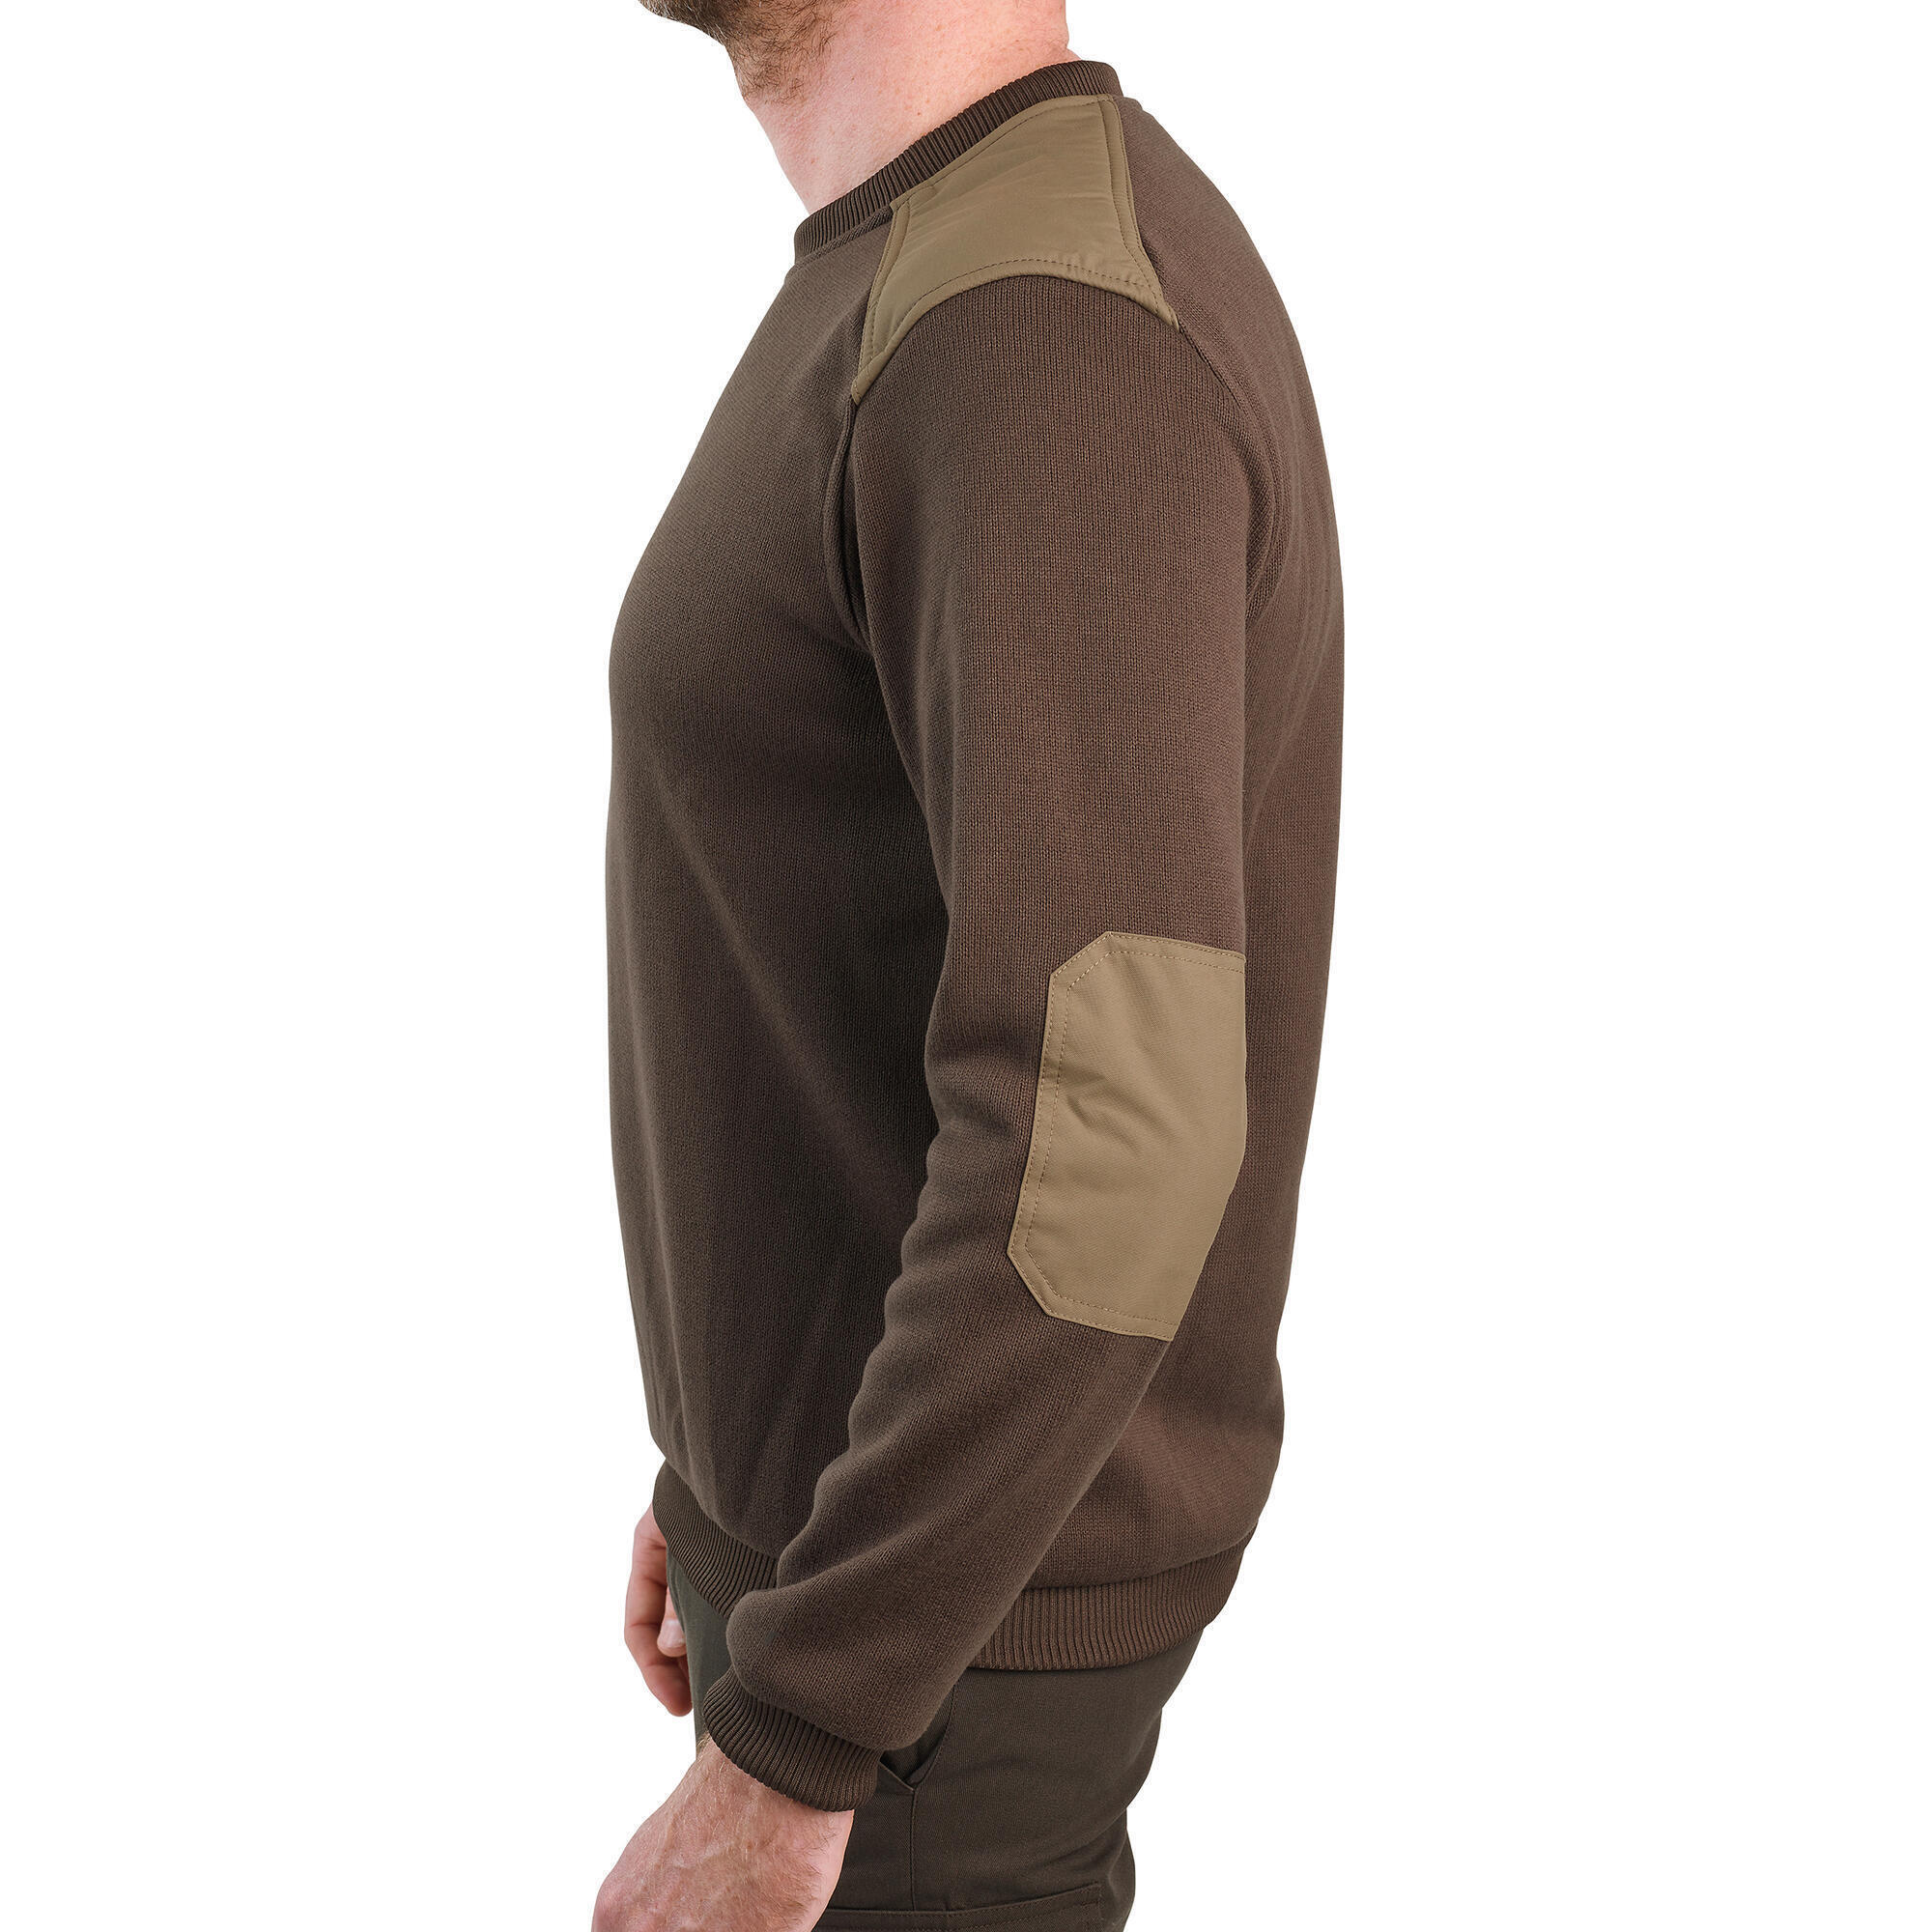 Pullover for Cold Weather - Brown 5/5